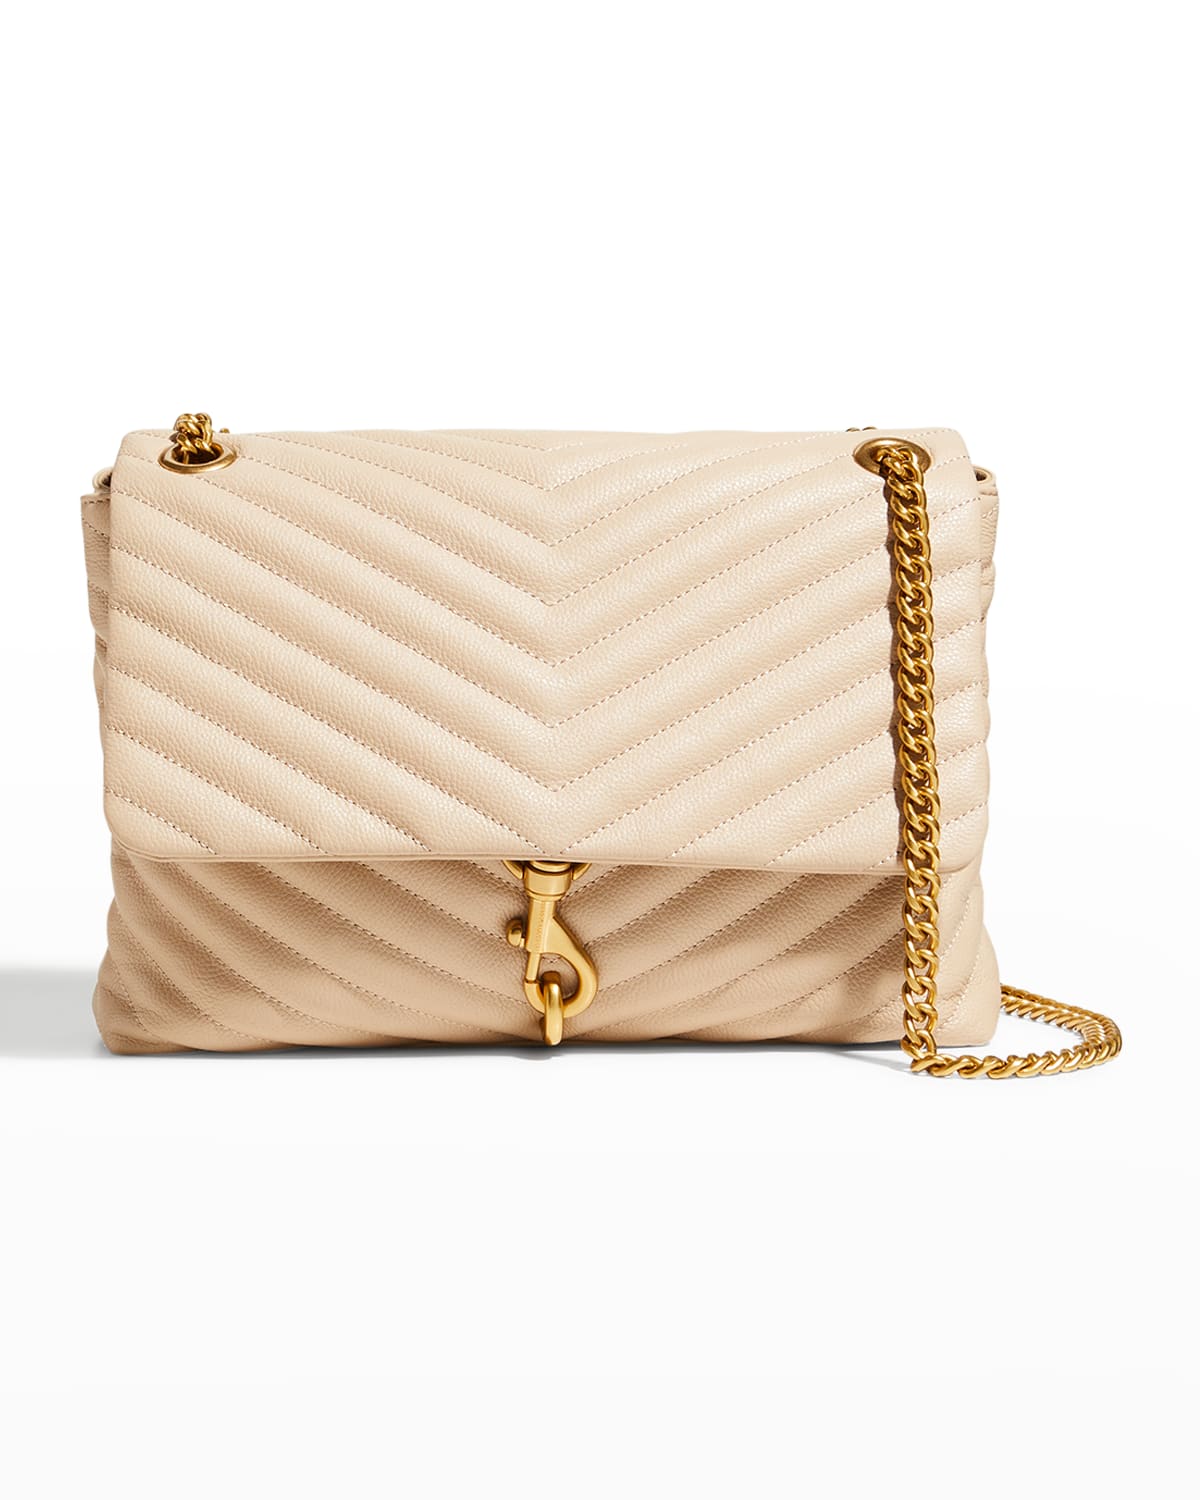 Edie Flap Quilted Leather Shoulder Bag